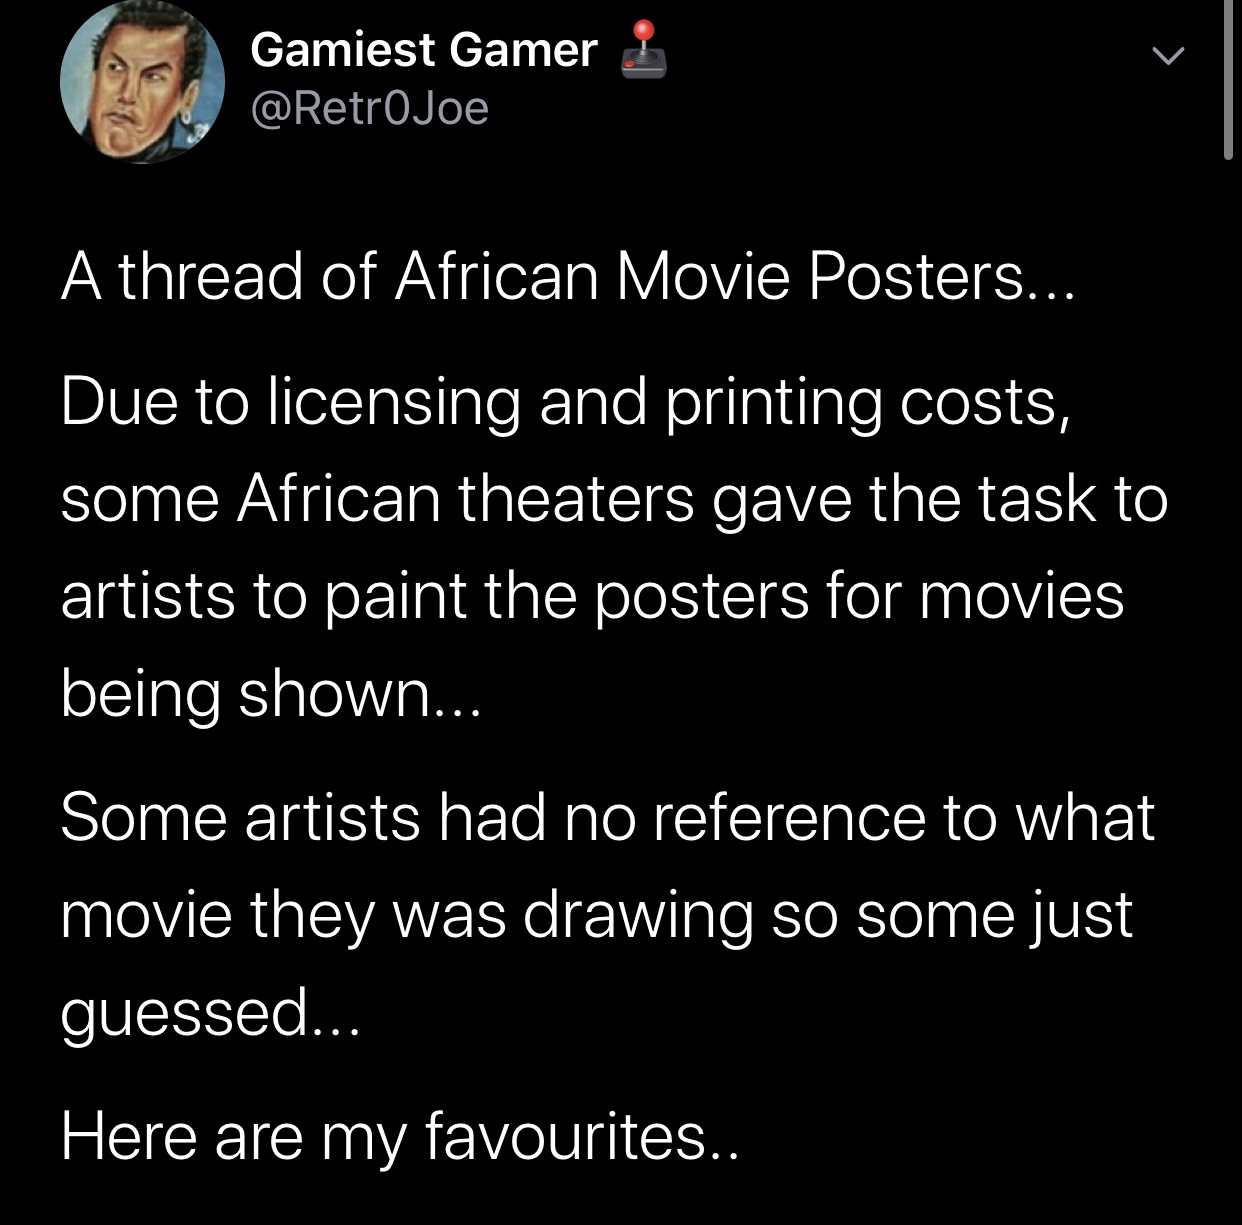 point - Gamiest Gamer I A thread of African Movie Posters... Due to licensing and printing costs, some African theaters gave the task to artists to paint the posters for movies being shown... Some artists had no reference to what movie they was drawing so